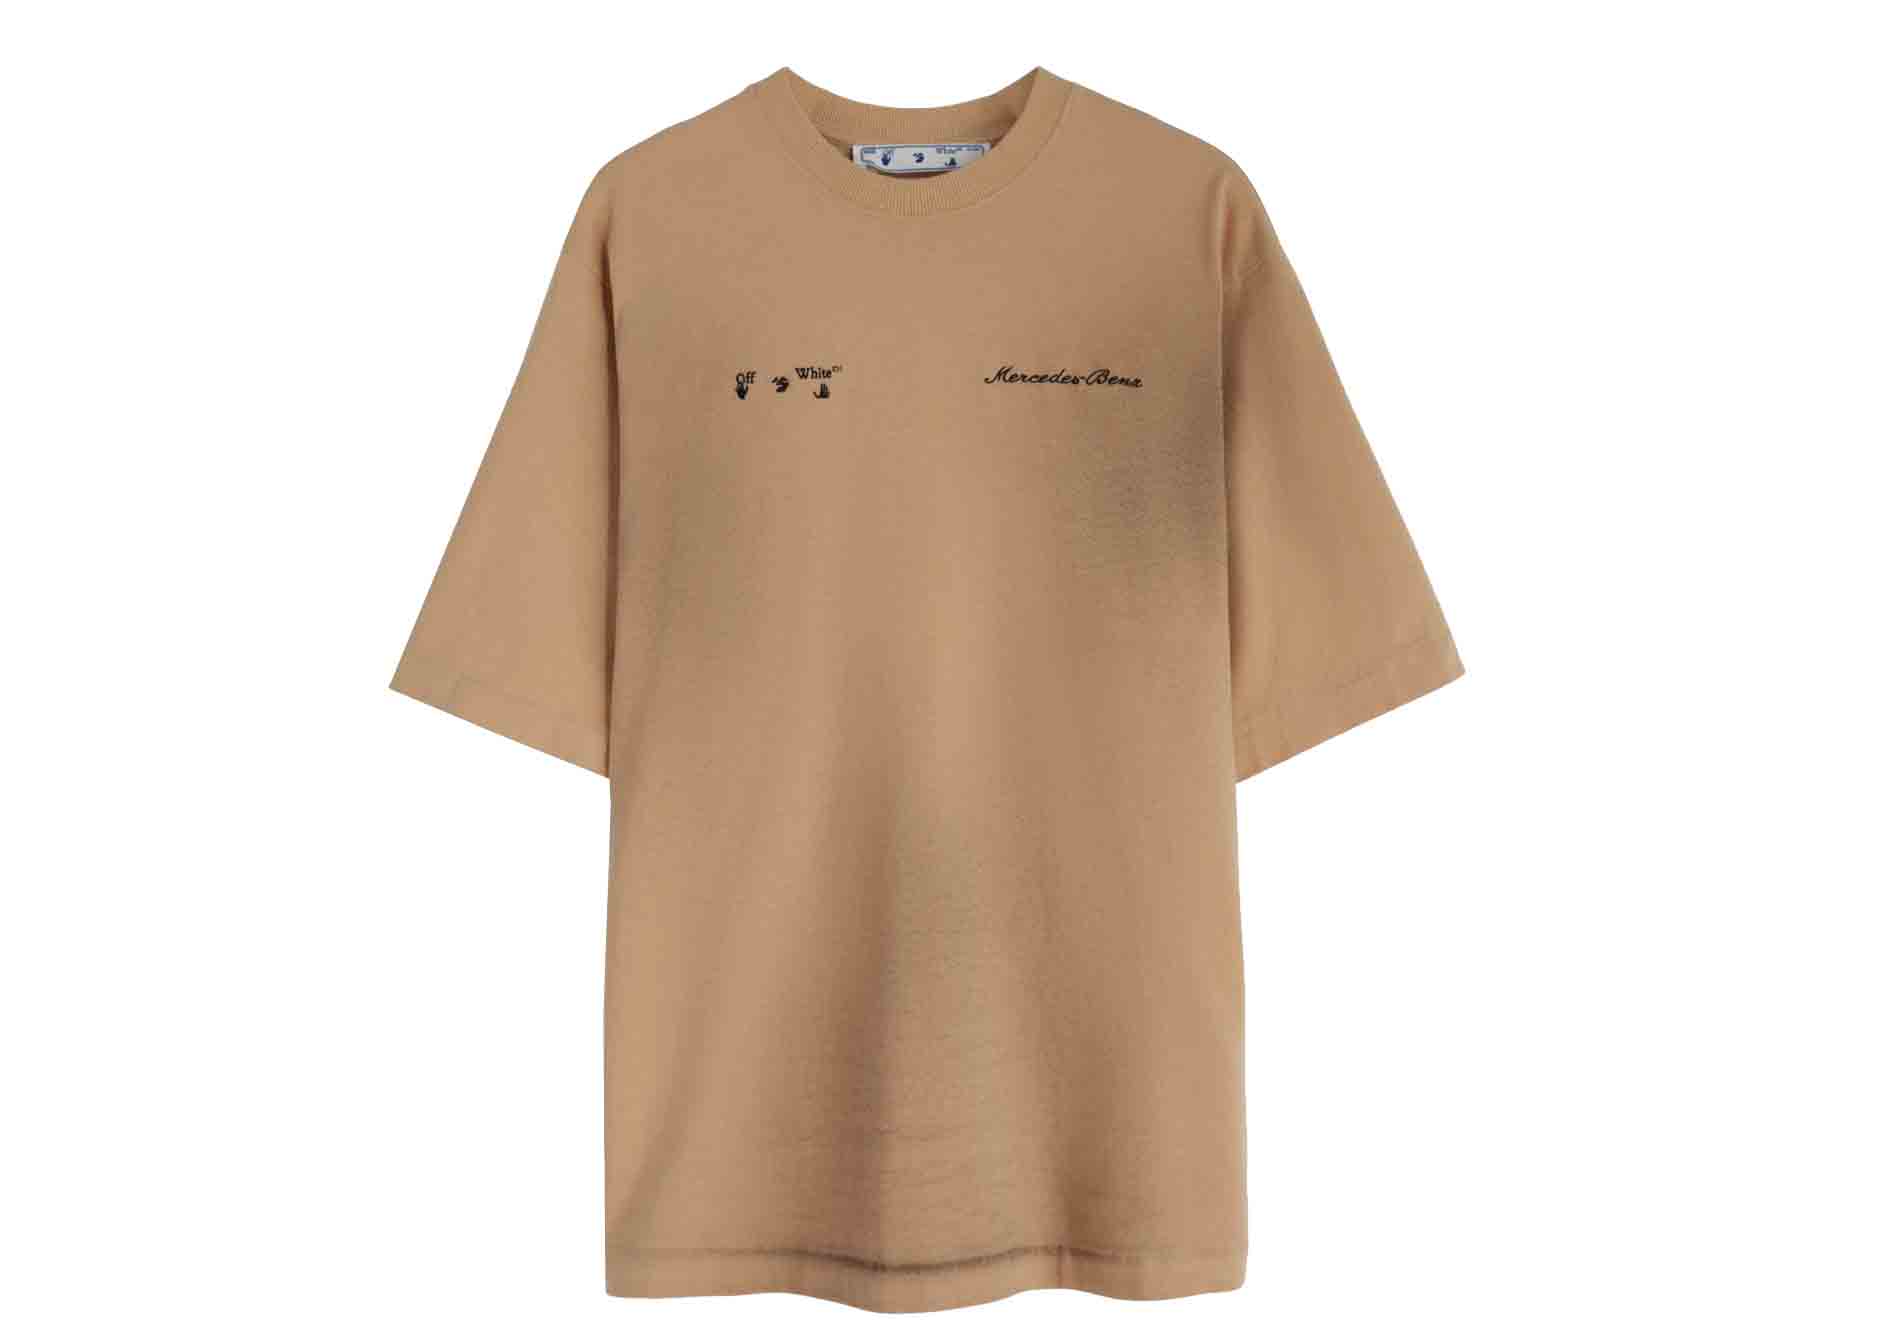 OFF-WHITE C/O Project Maybach S/S T-shirt Beige Men's - SS22 - US